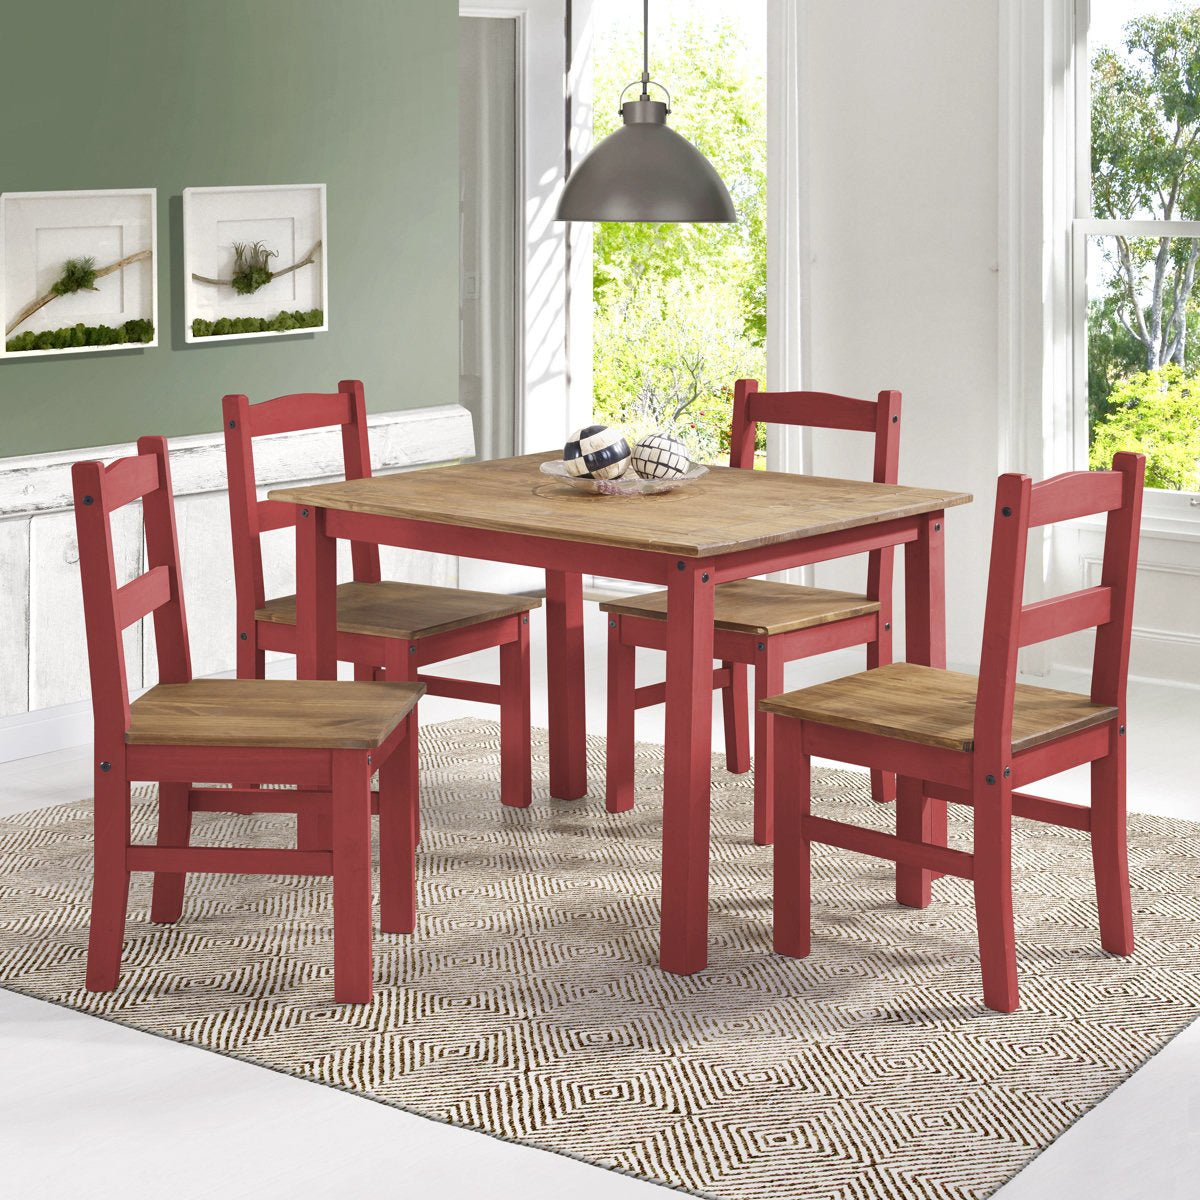 Manhattan Comfort York 5-Piece Solid Wood Dining Set with 1 Table and 4 Chairs in Red Wash-Minimal & Modern